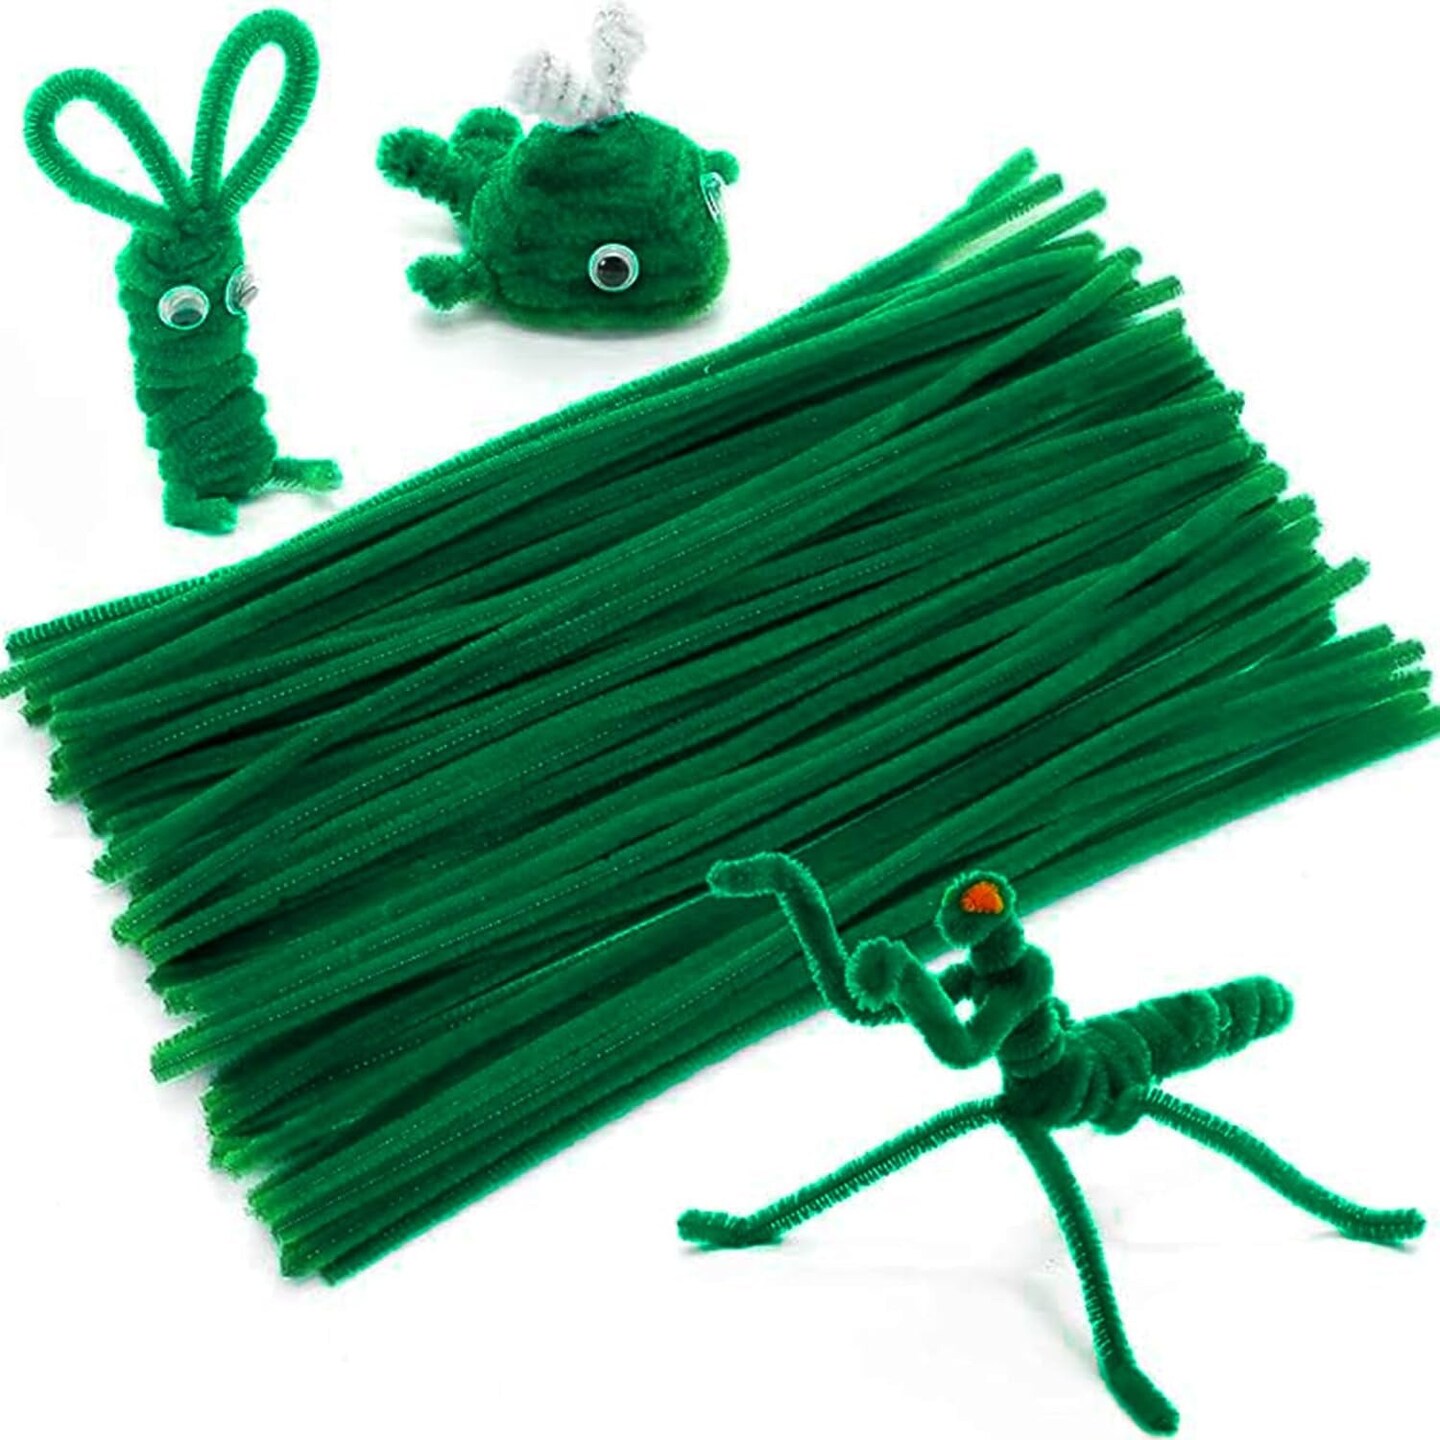 Pipecleaners / Chenille Stems